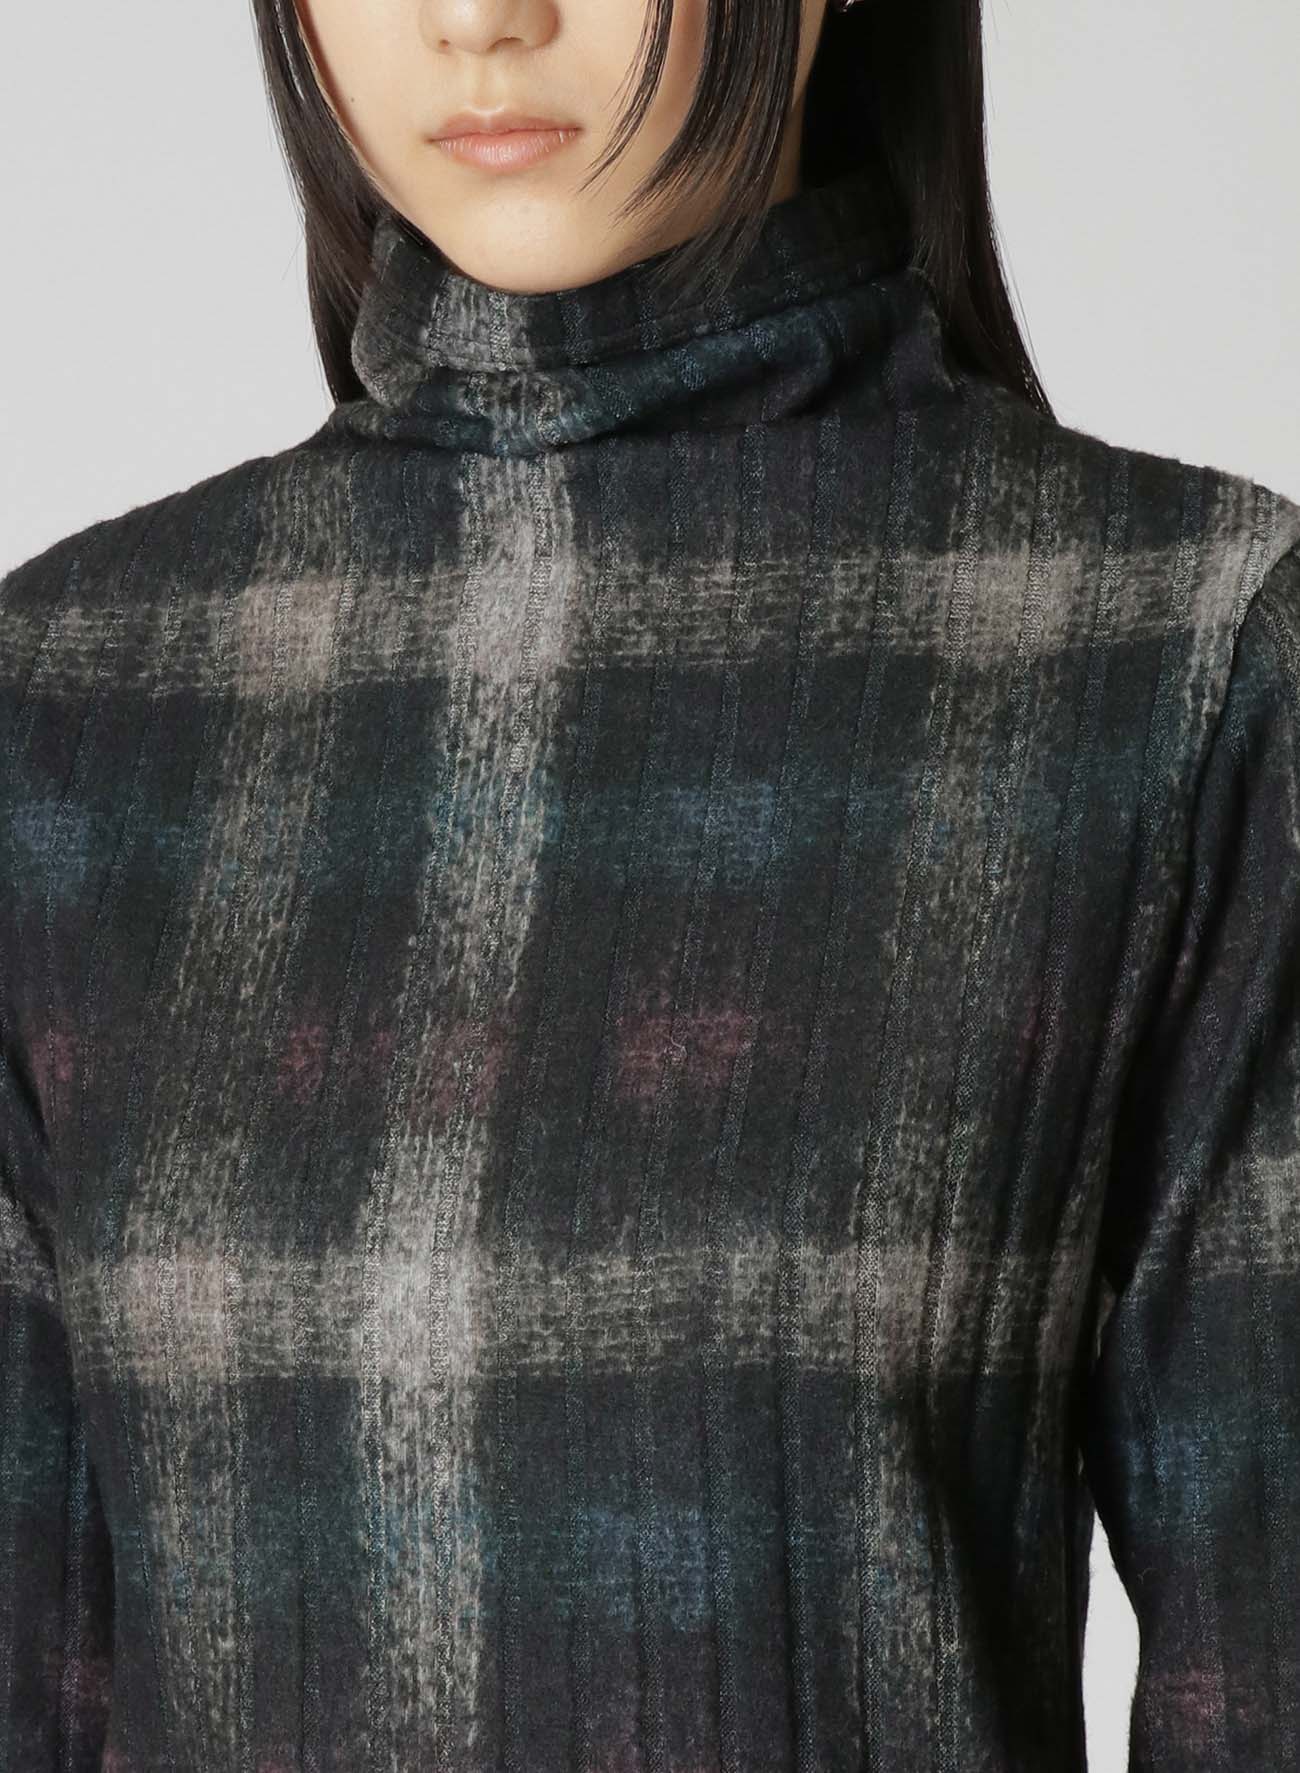 UNEVEN BLURRED CHECK PRINT LONG SLEEVE HIGH NECK T